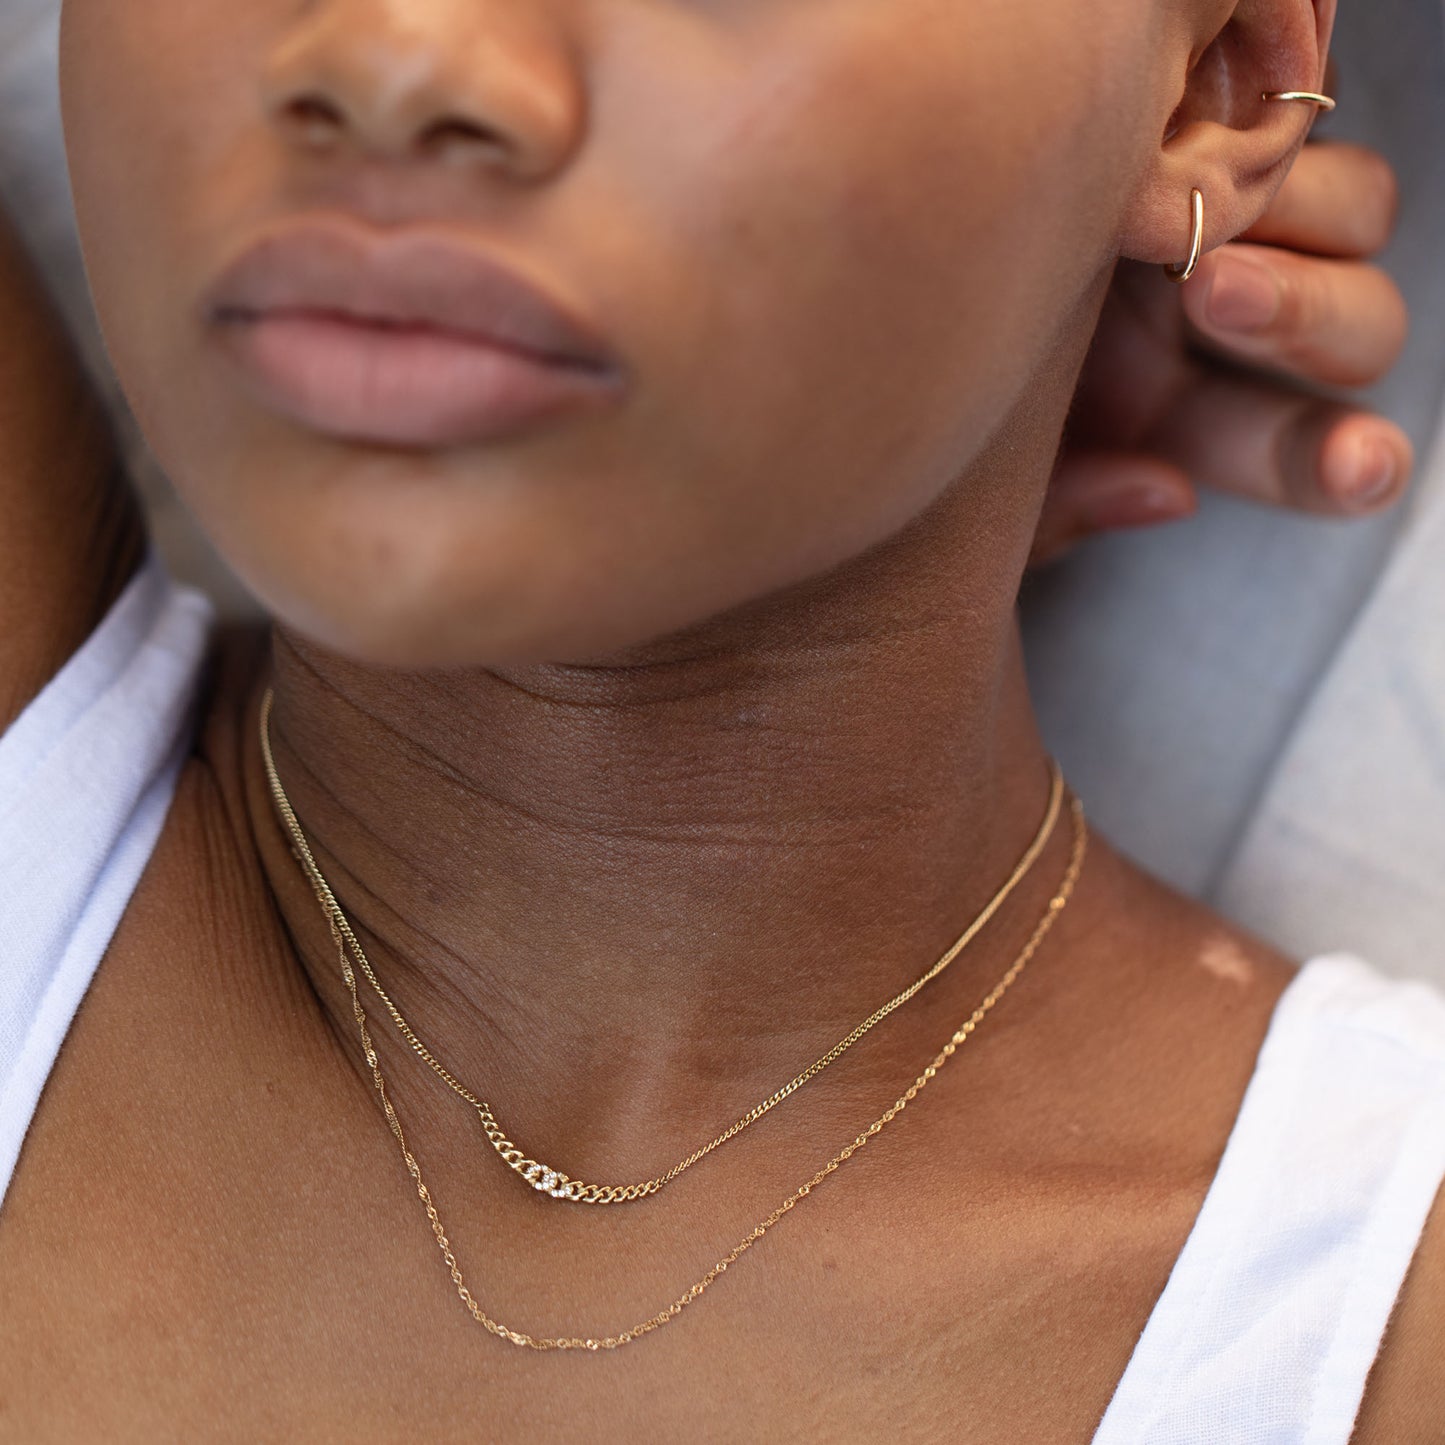 Solid Gold Simple Oblong Hoops